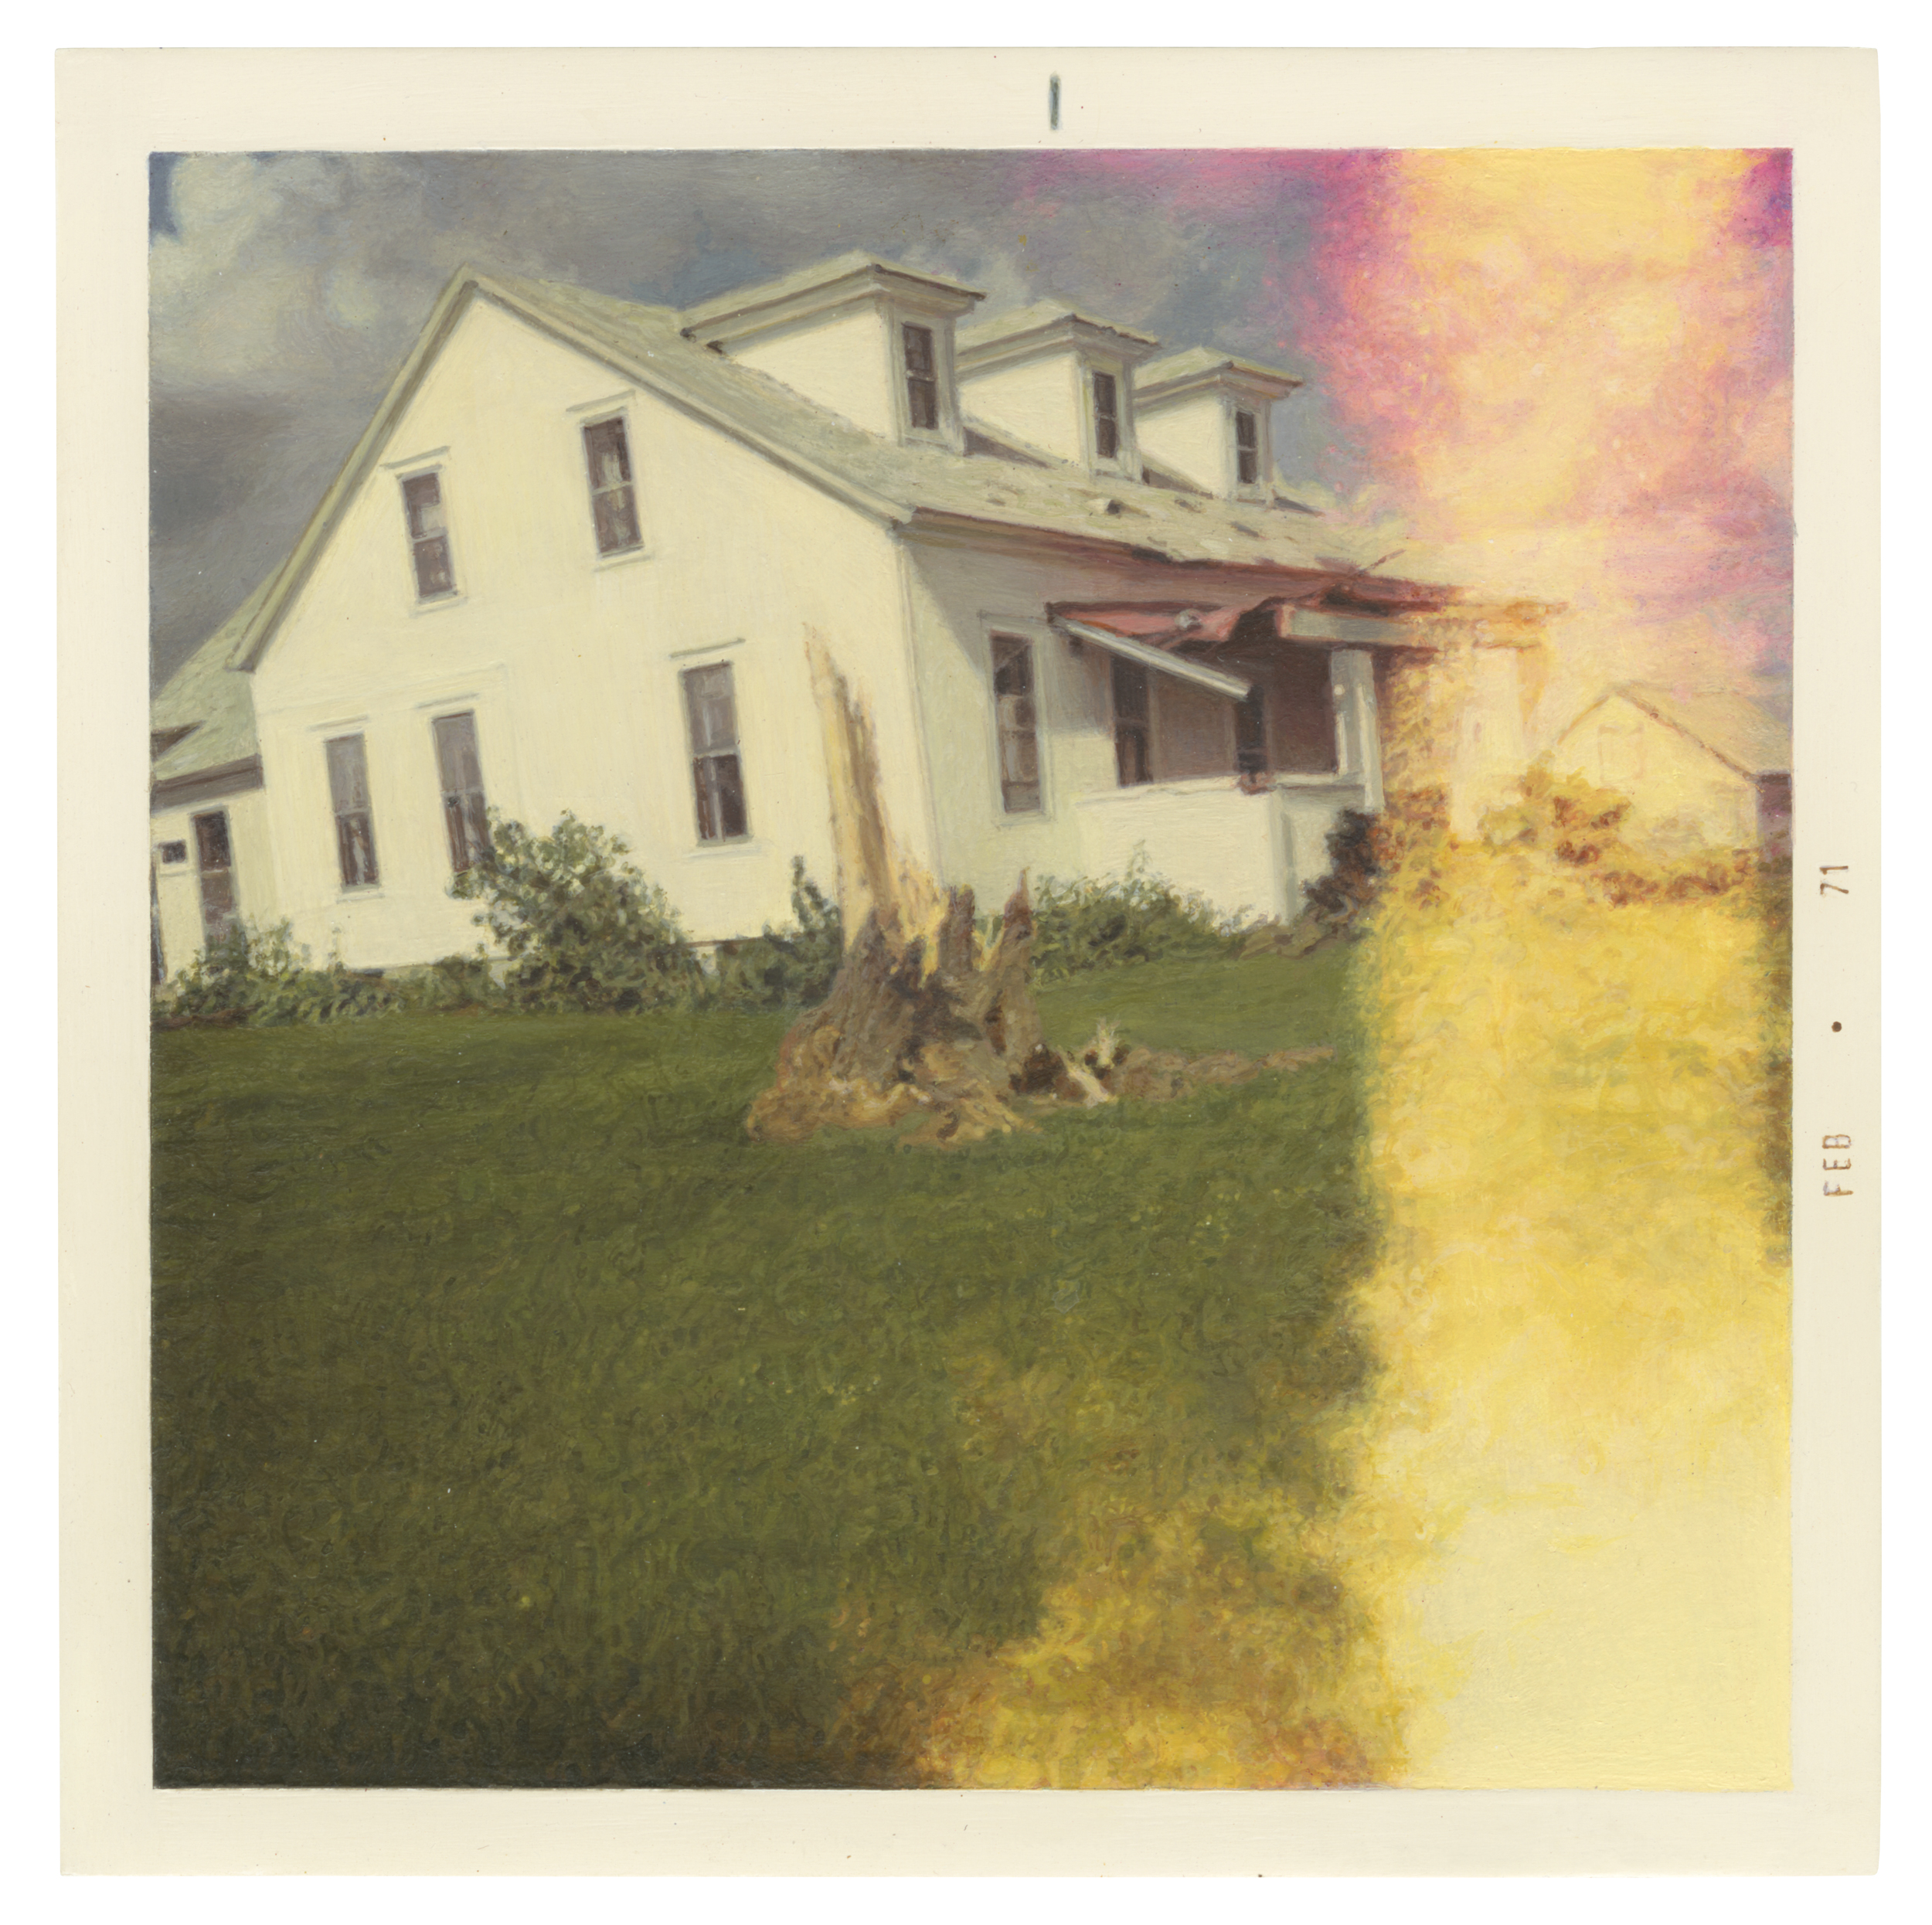 A color image depicting a painting of a light-leaked Polaroid of a damaged house and destroyed tree on a lawn